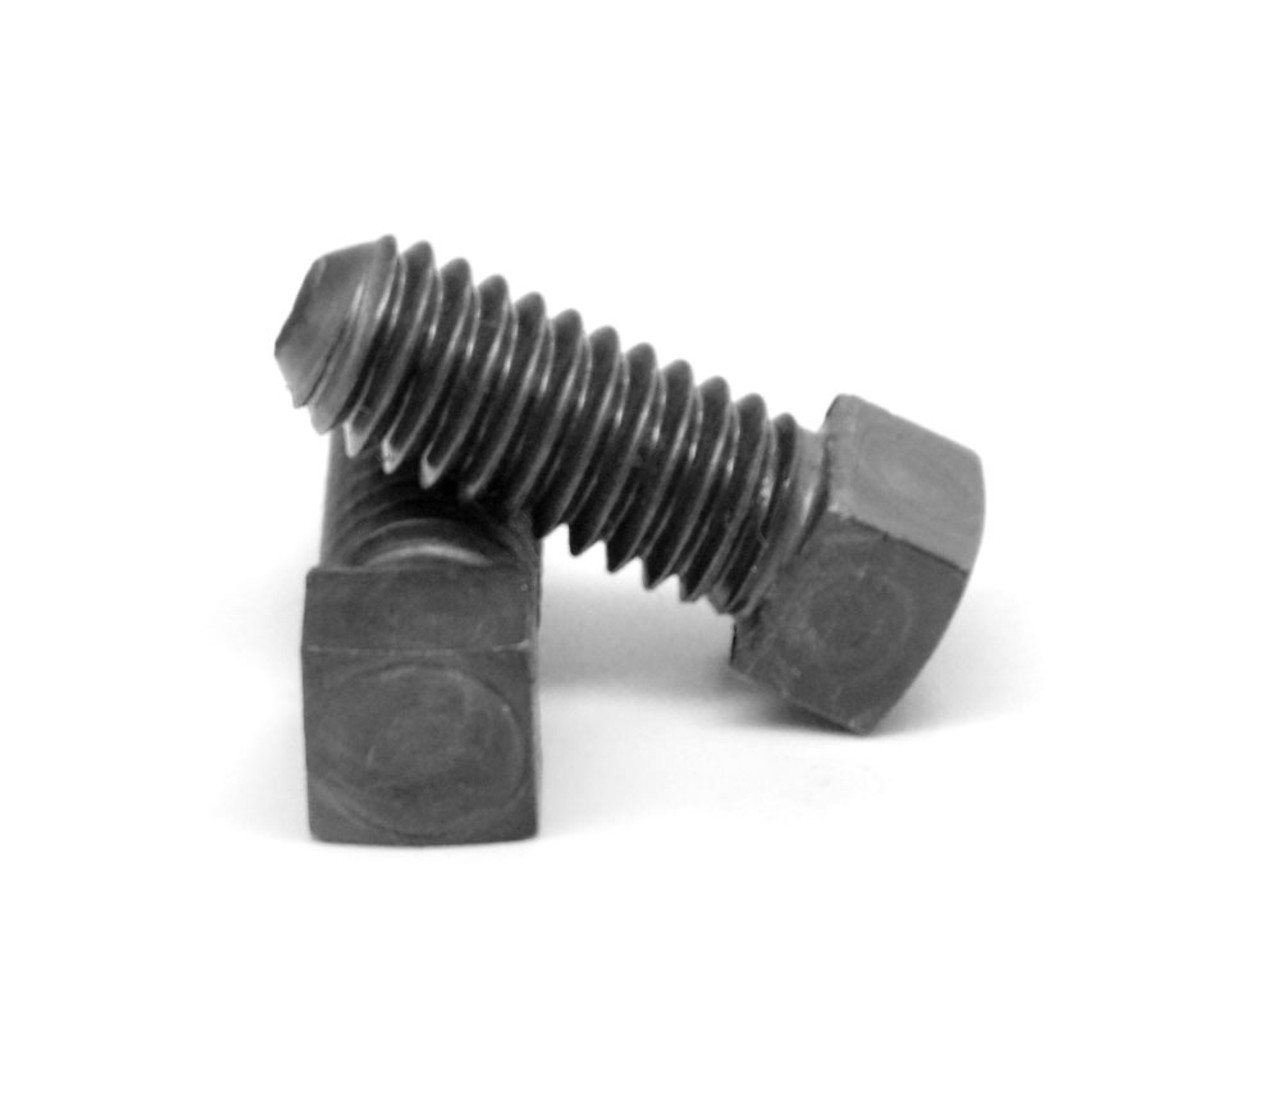 1/4"-20 x 1" (FT) Coarse Thread Square Head Set Screw Oval Point Low Carbon Steel Case Hardened Plain Finish